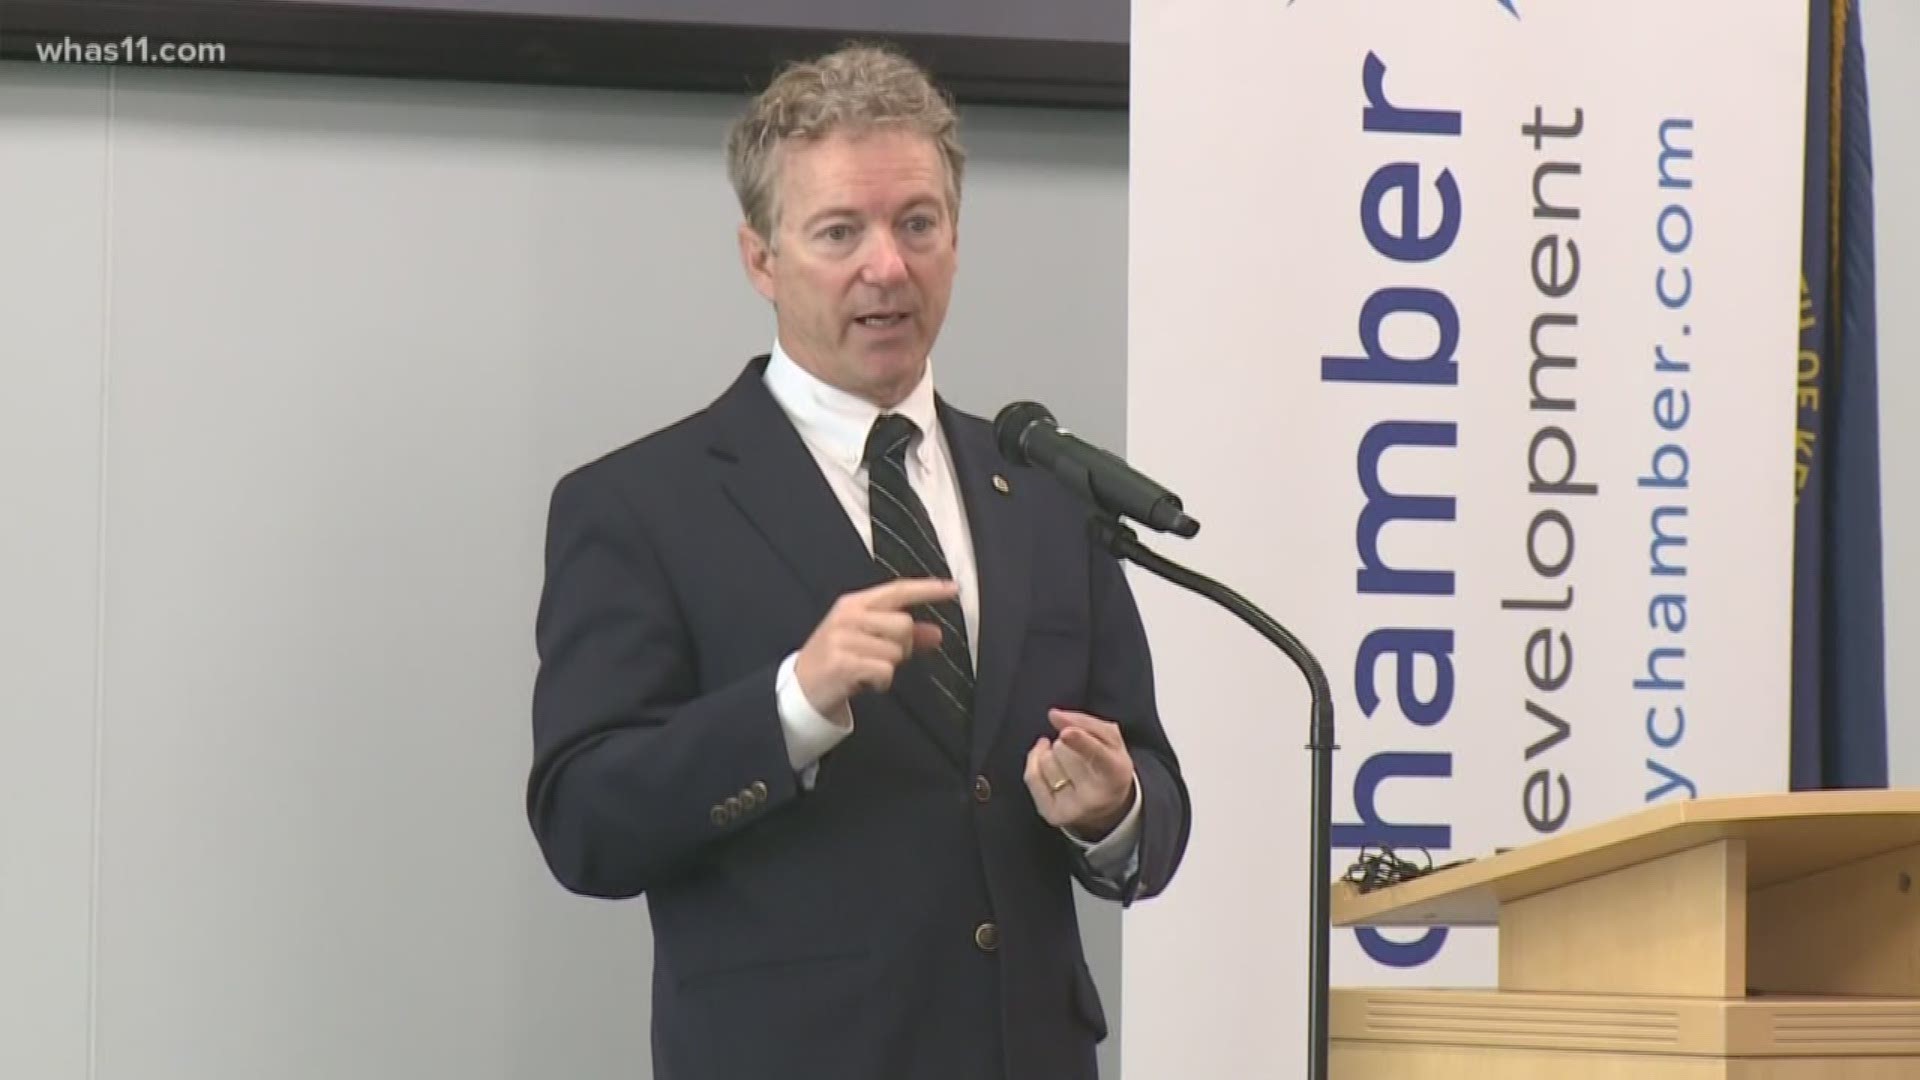 Senator Paul defended his decision to vote against the president's emergency border wall declaration to an Oldham County crowd.